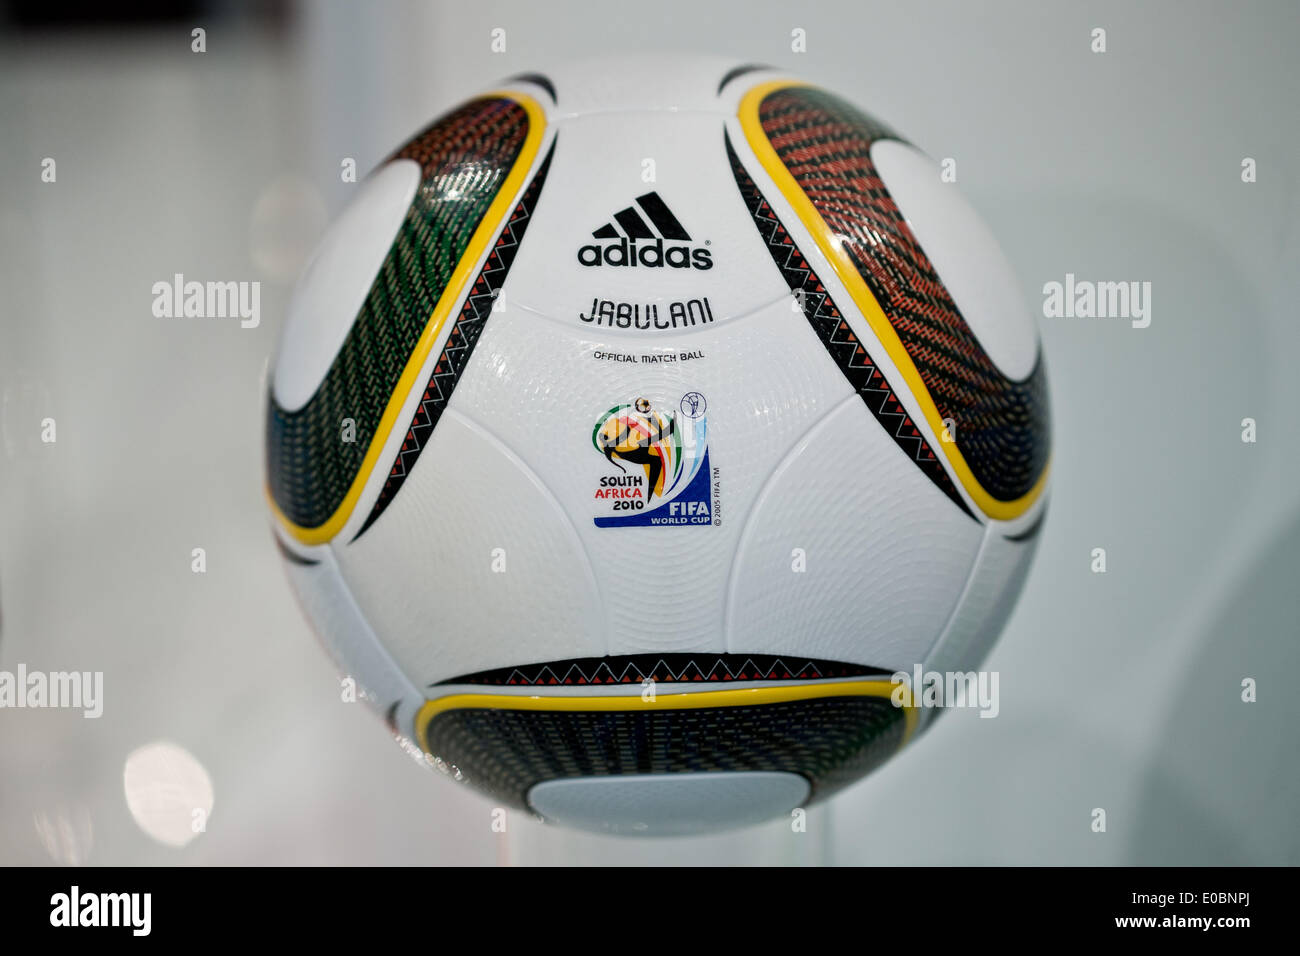 The 'Jabulani' soccer ball which was the official ball of the 2010 soccer  world cup in South Africa is pictured during the general meeting of  sporting goods manufacturer adidas in Fuerth, Germany,